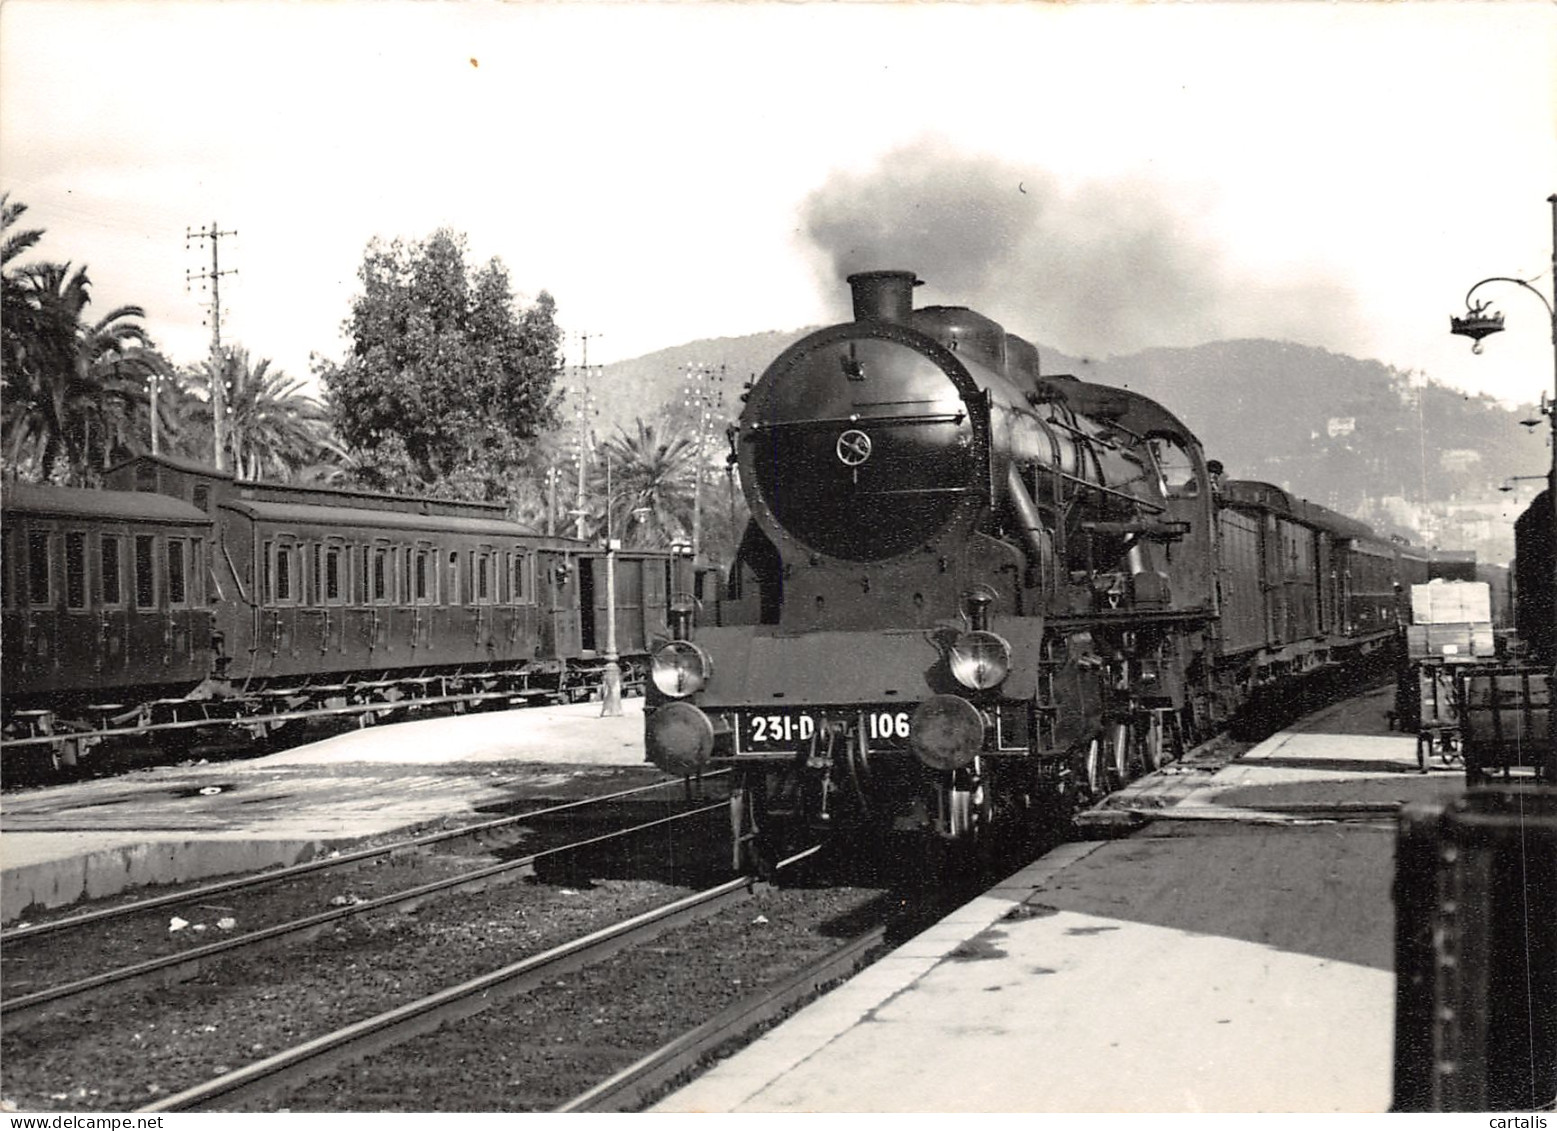 06-CANNES-GARE-LOCOMOTIVE-N 596-C/0053 - Cannes